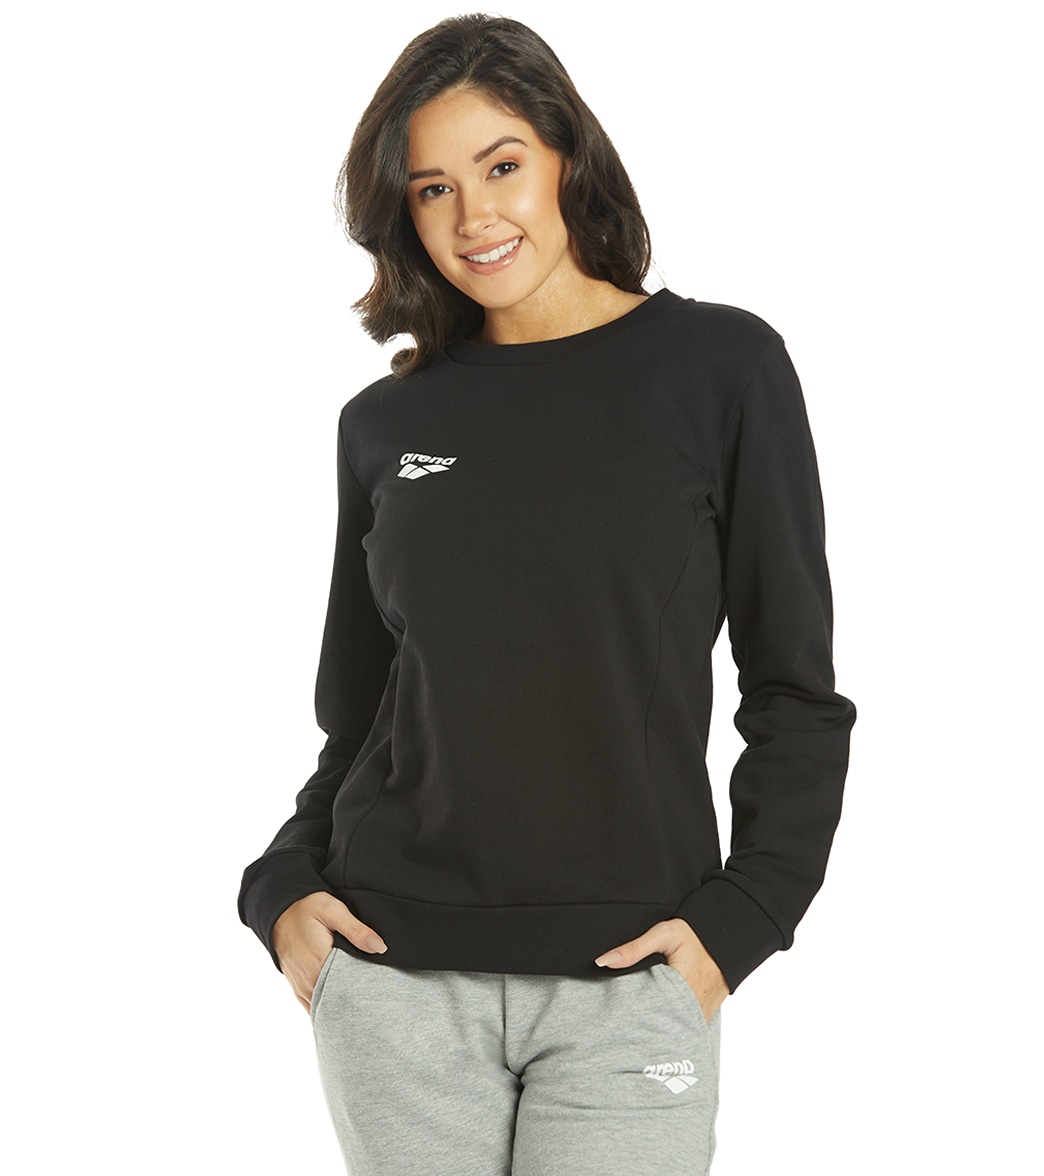 Arena Women's National Team Crew Sweater - Black Large Cotton/Polyester - Swimoutlet.com